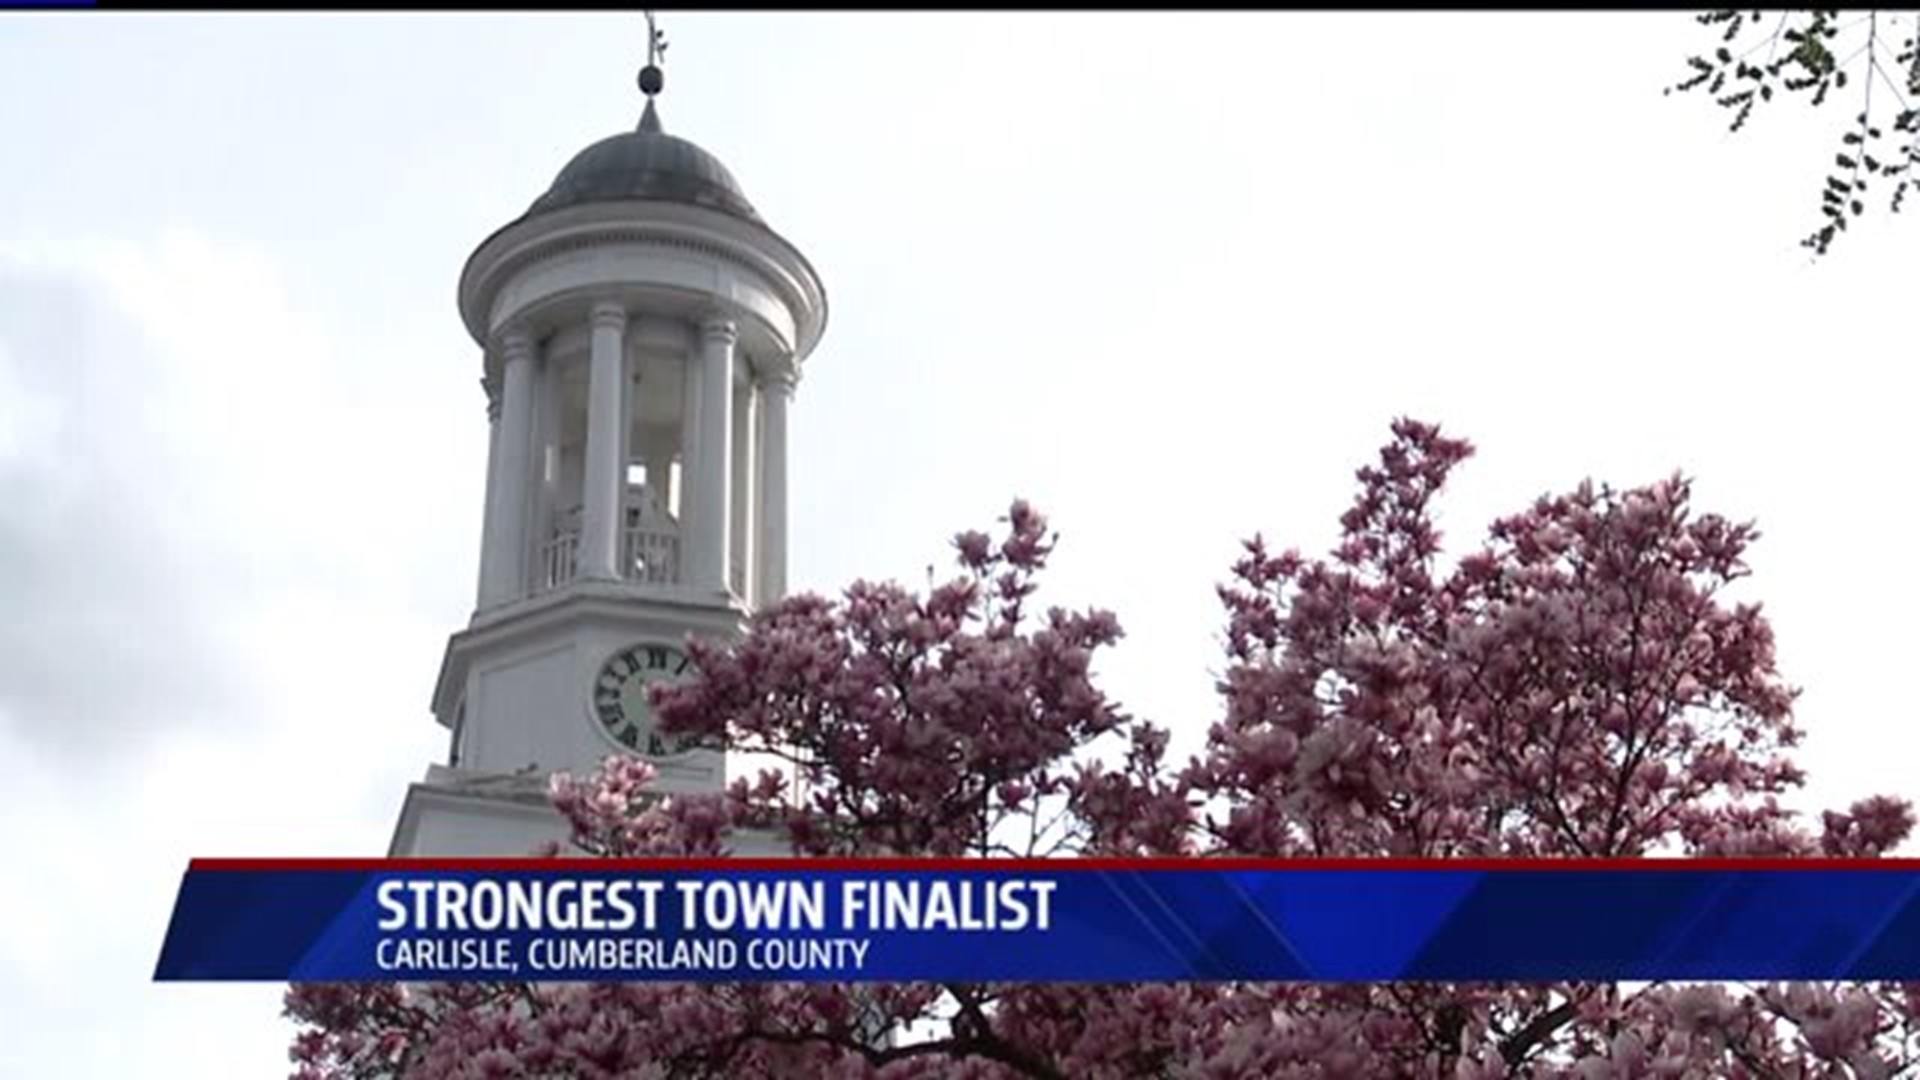 Carlisle a finalist for "Strongest Town" online contest